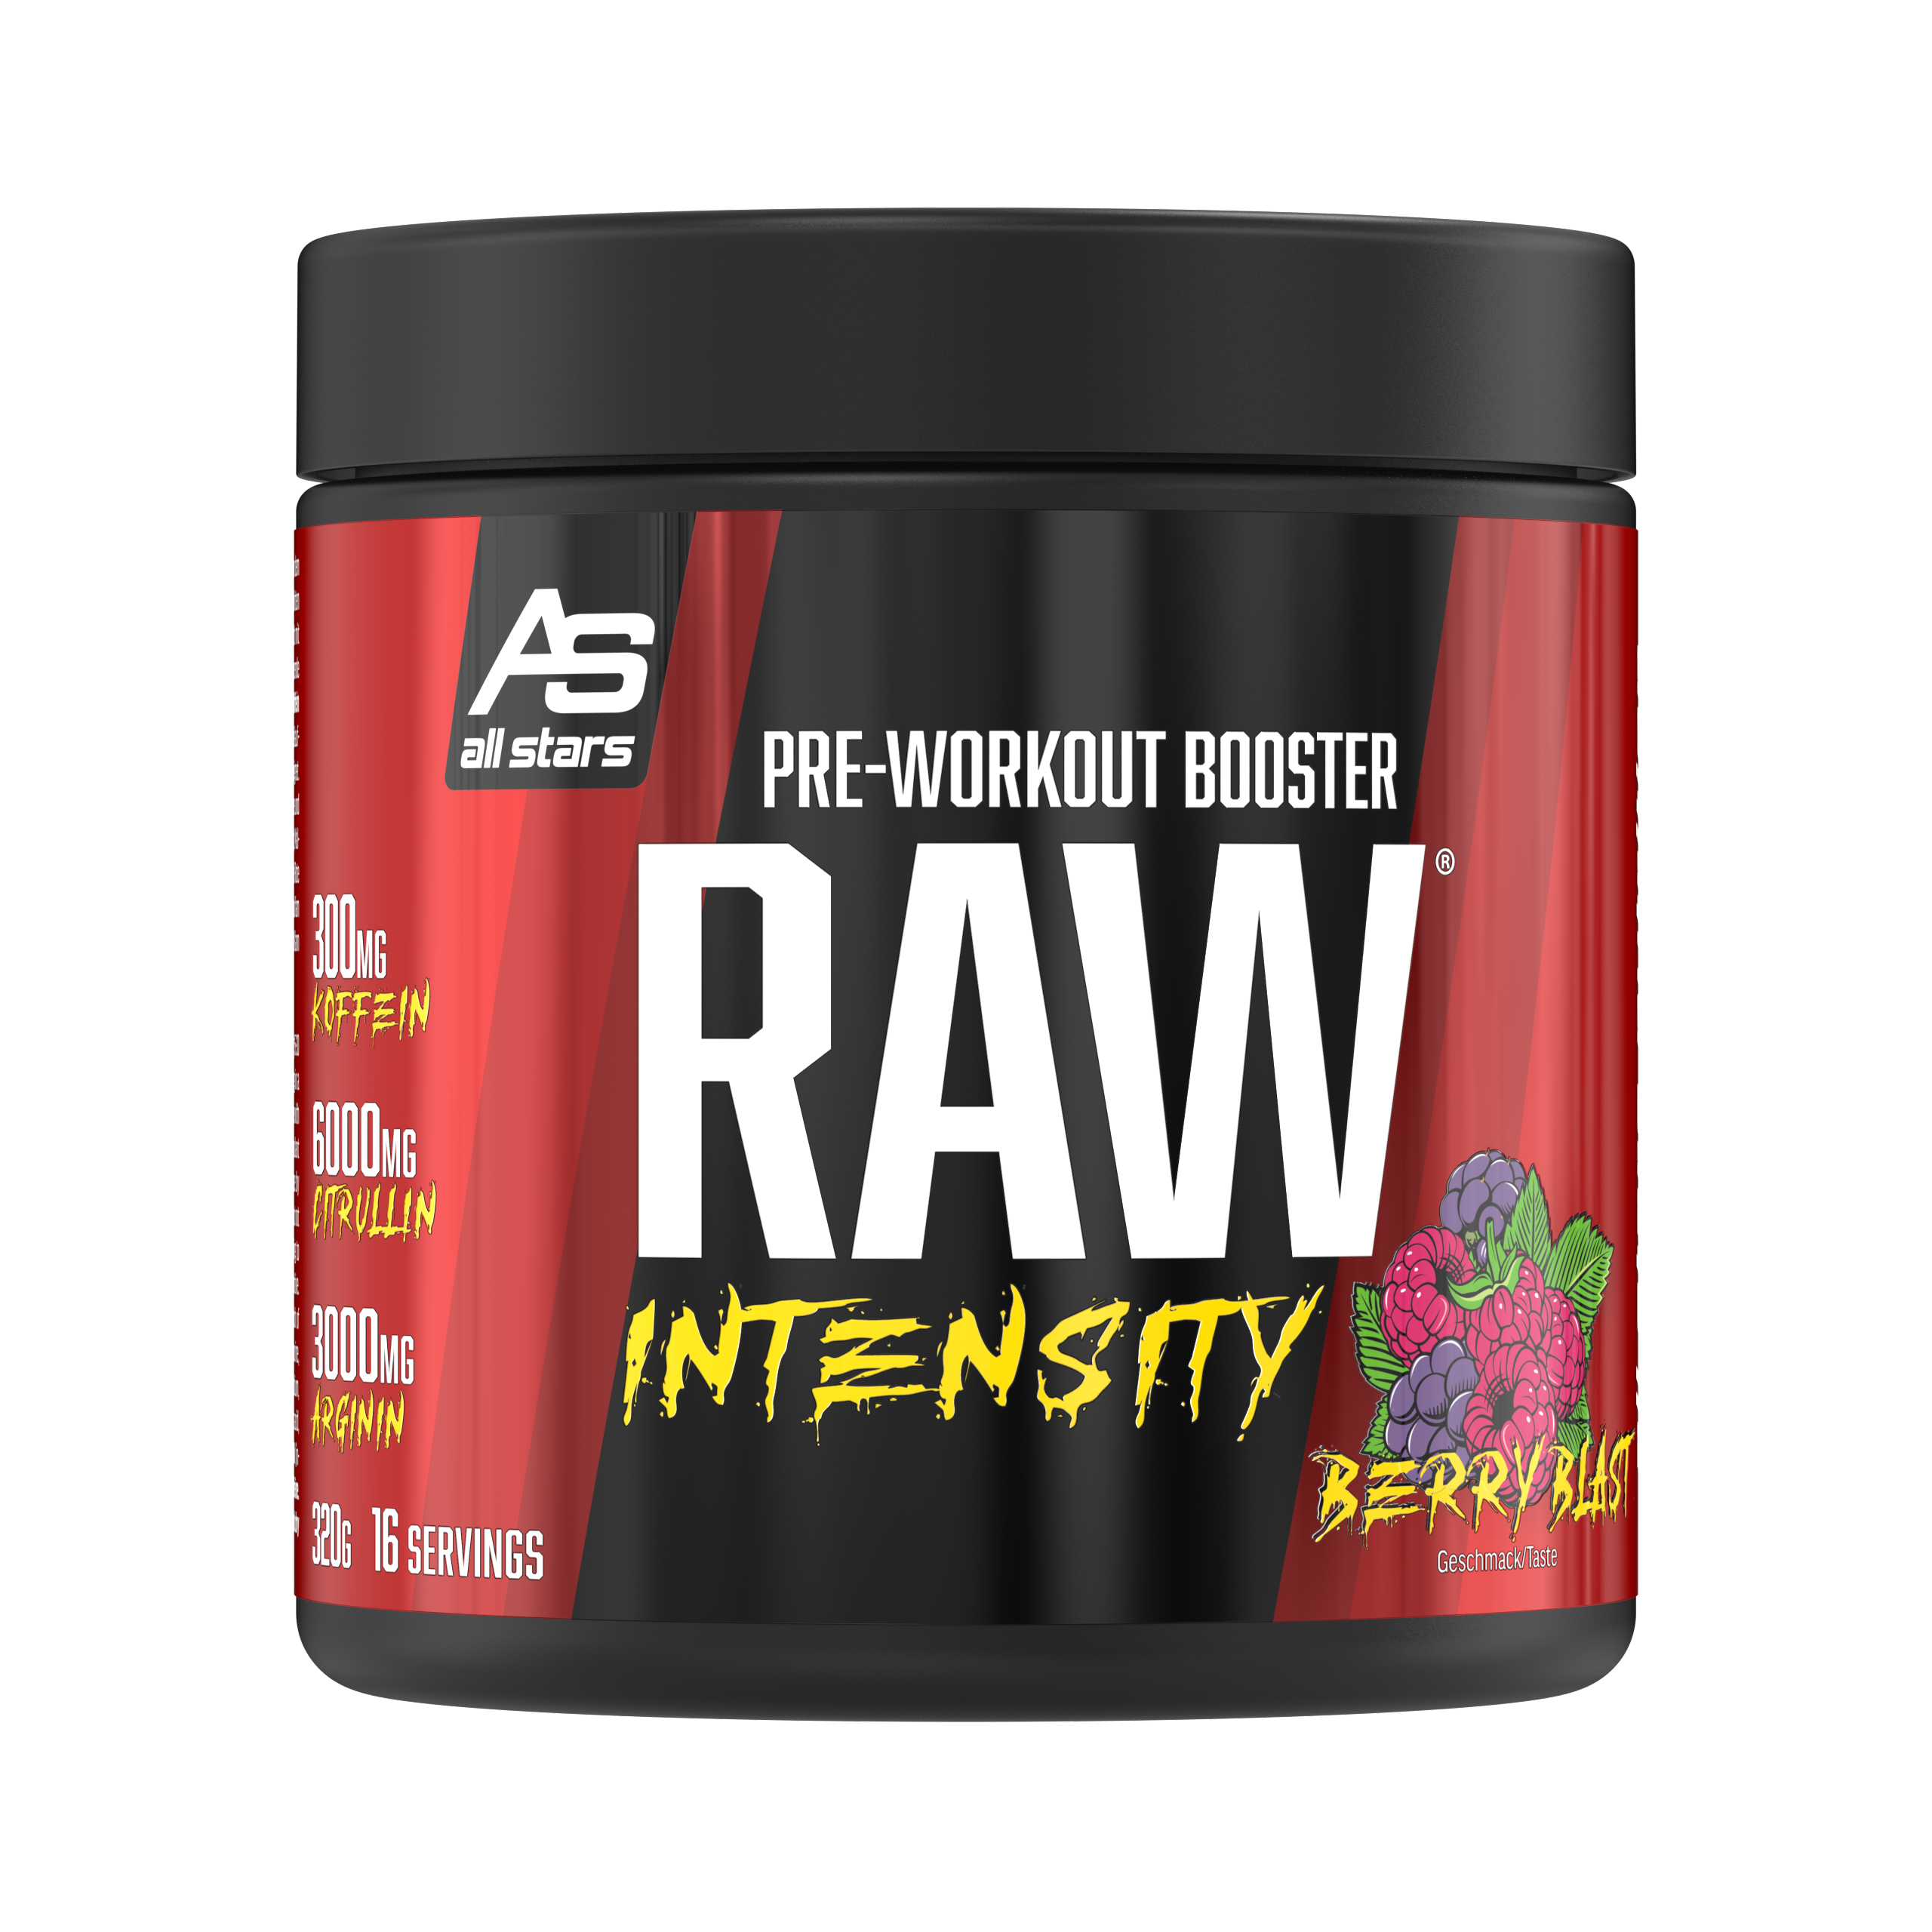 ALL STARS Raw Intensity Pre Workout Booster